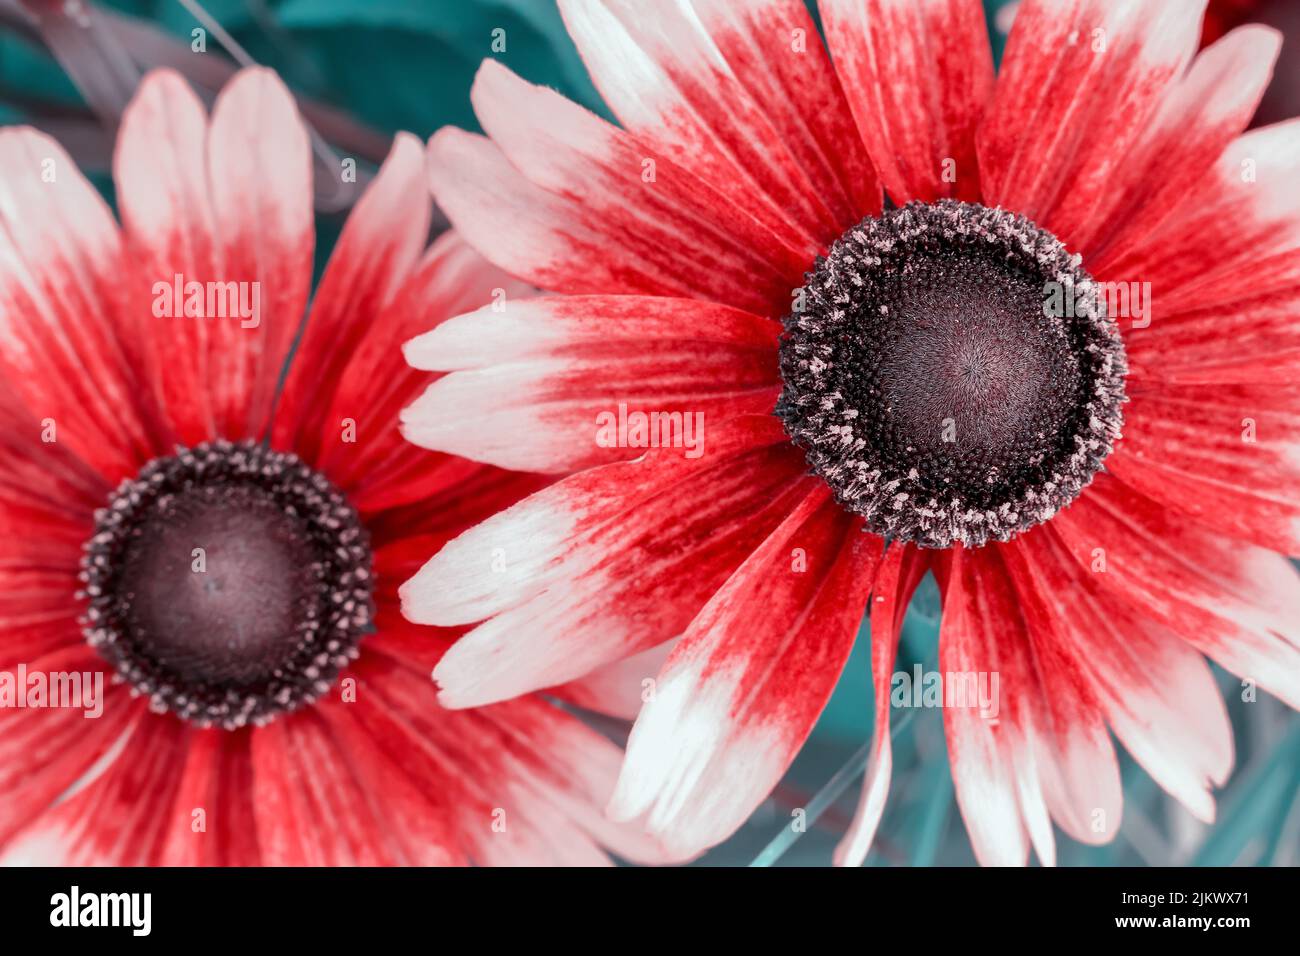 Red and white flowers against a blurry meadow background in Poland Stock Photo